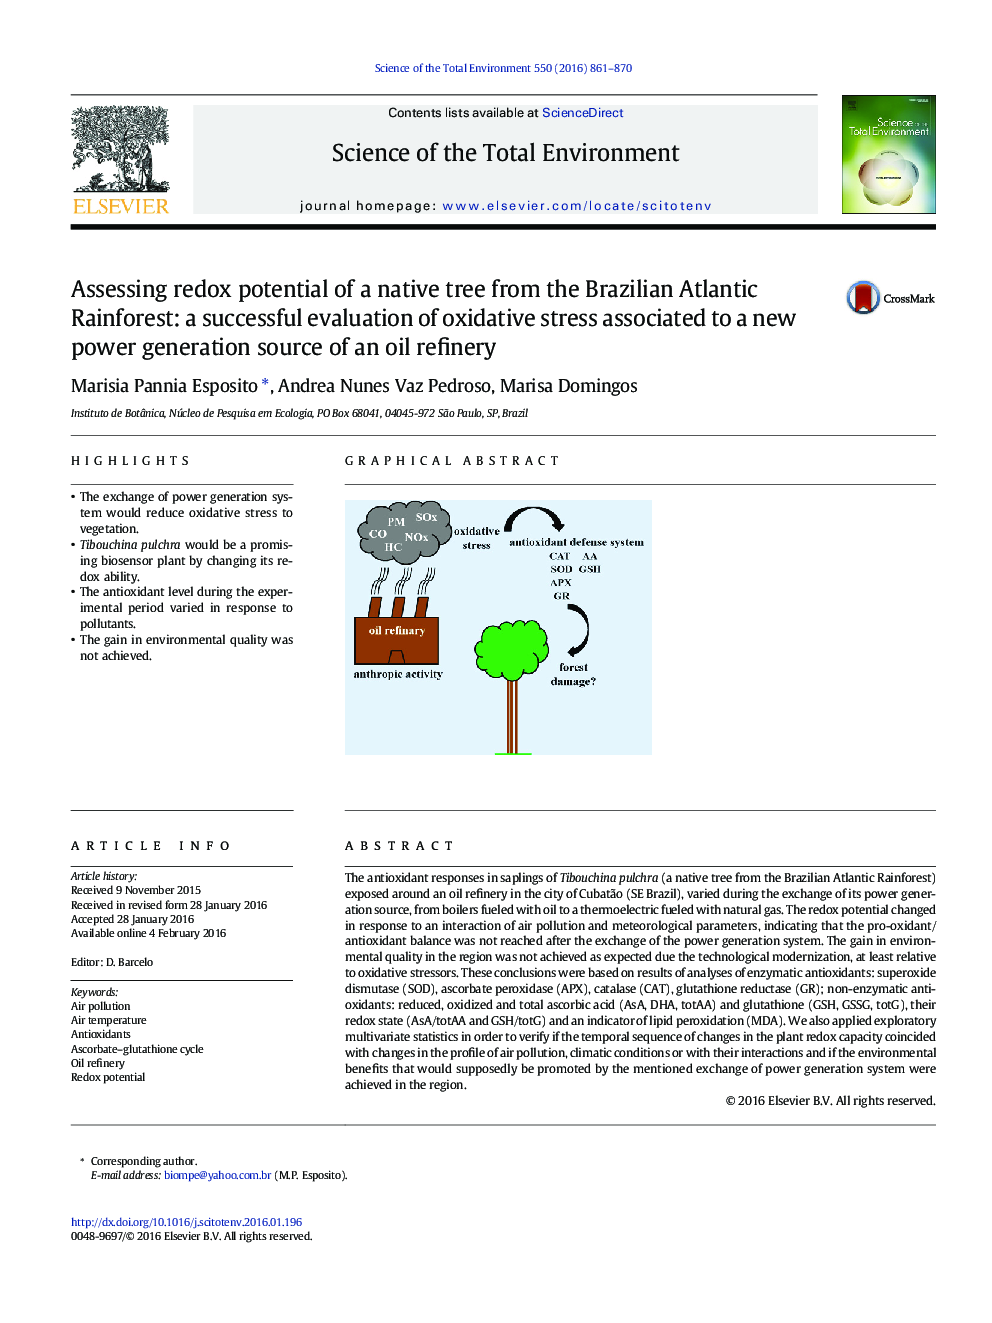 Assessing redox potential of a native tree from the Brazilian Atlantic Rainforest: a successful evaluation of oxidative stress associated to a new power generation source of an oil refinery